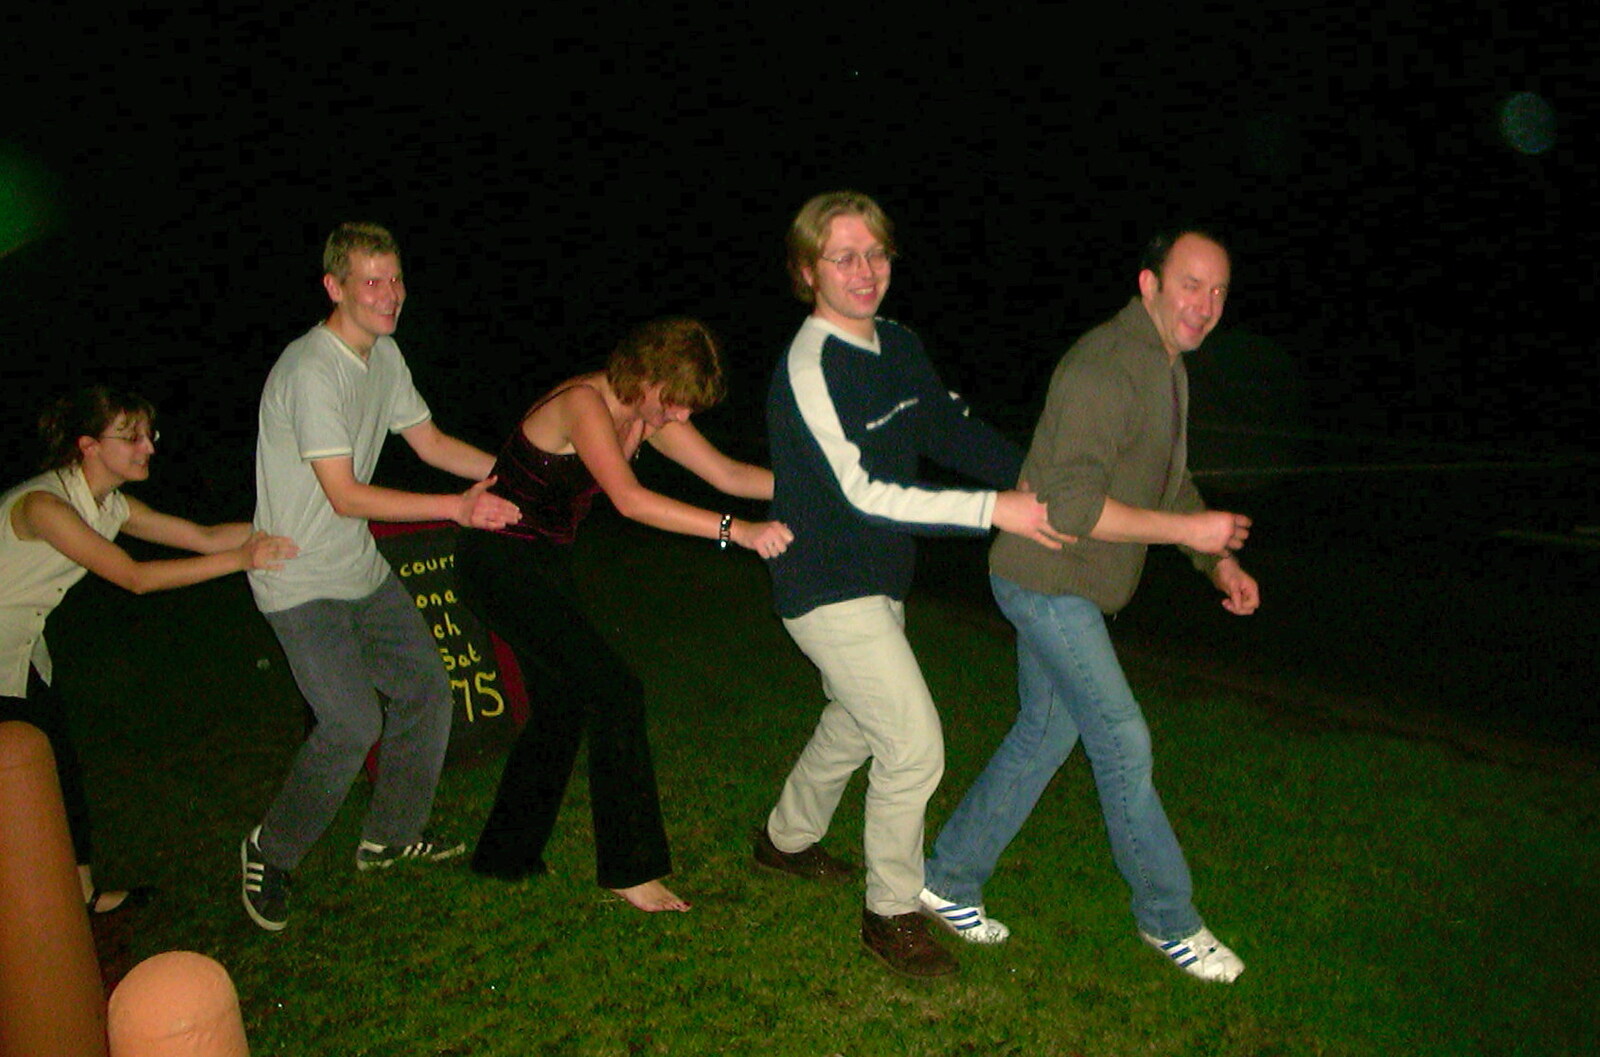 New Year's Eve at the Swan Inn, Brome, Suffolk - 31st December 2002: A conga escapes outside